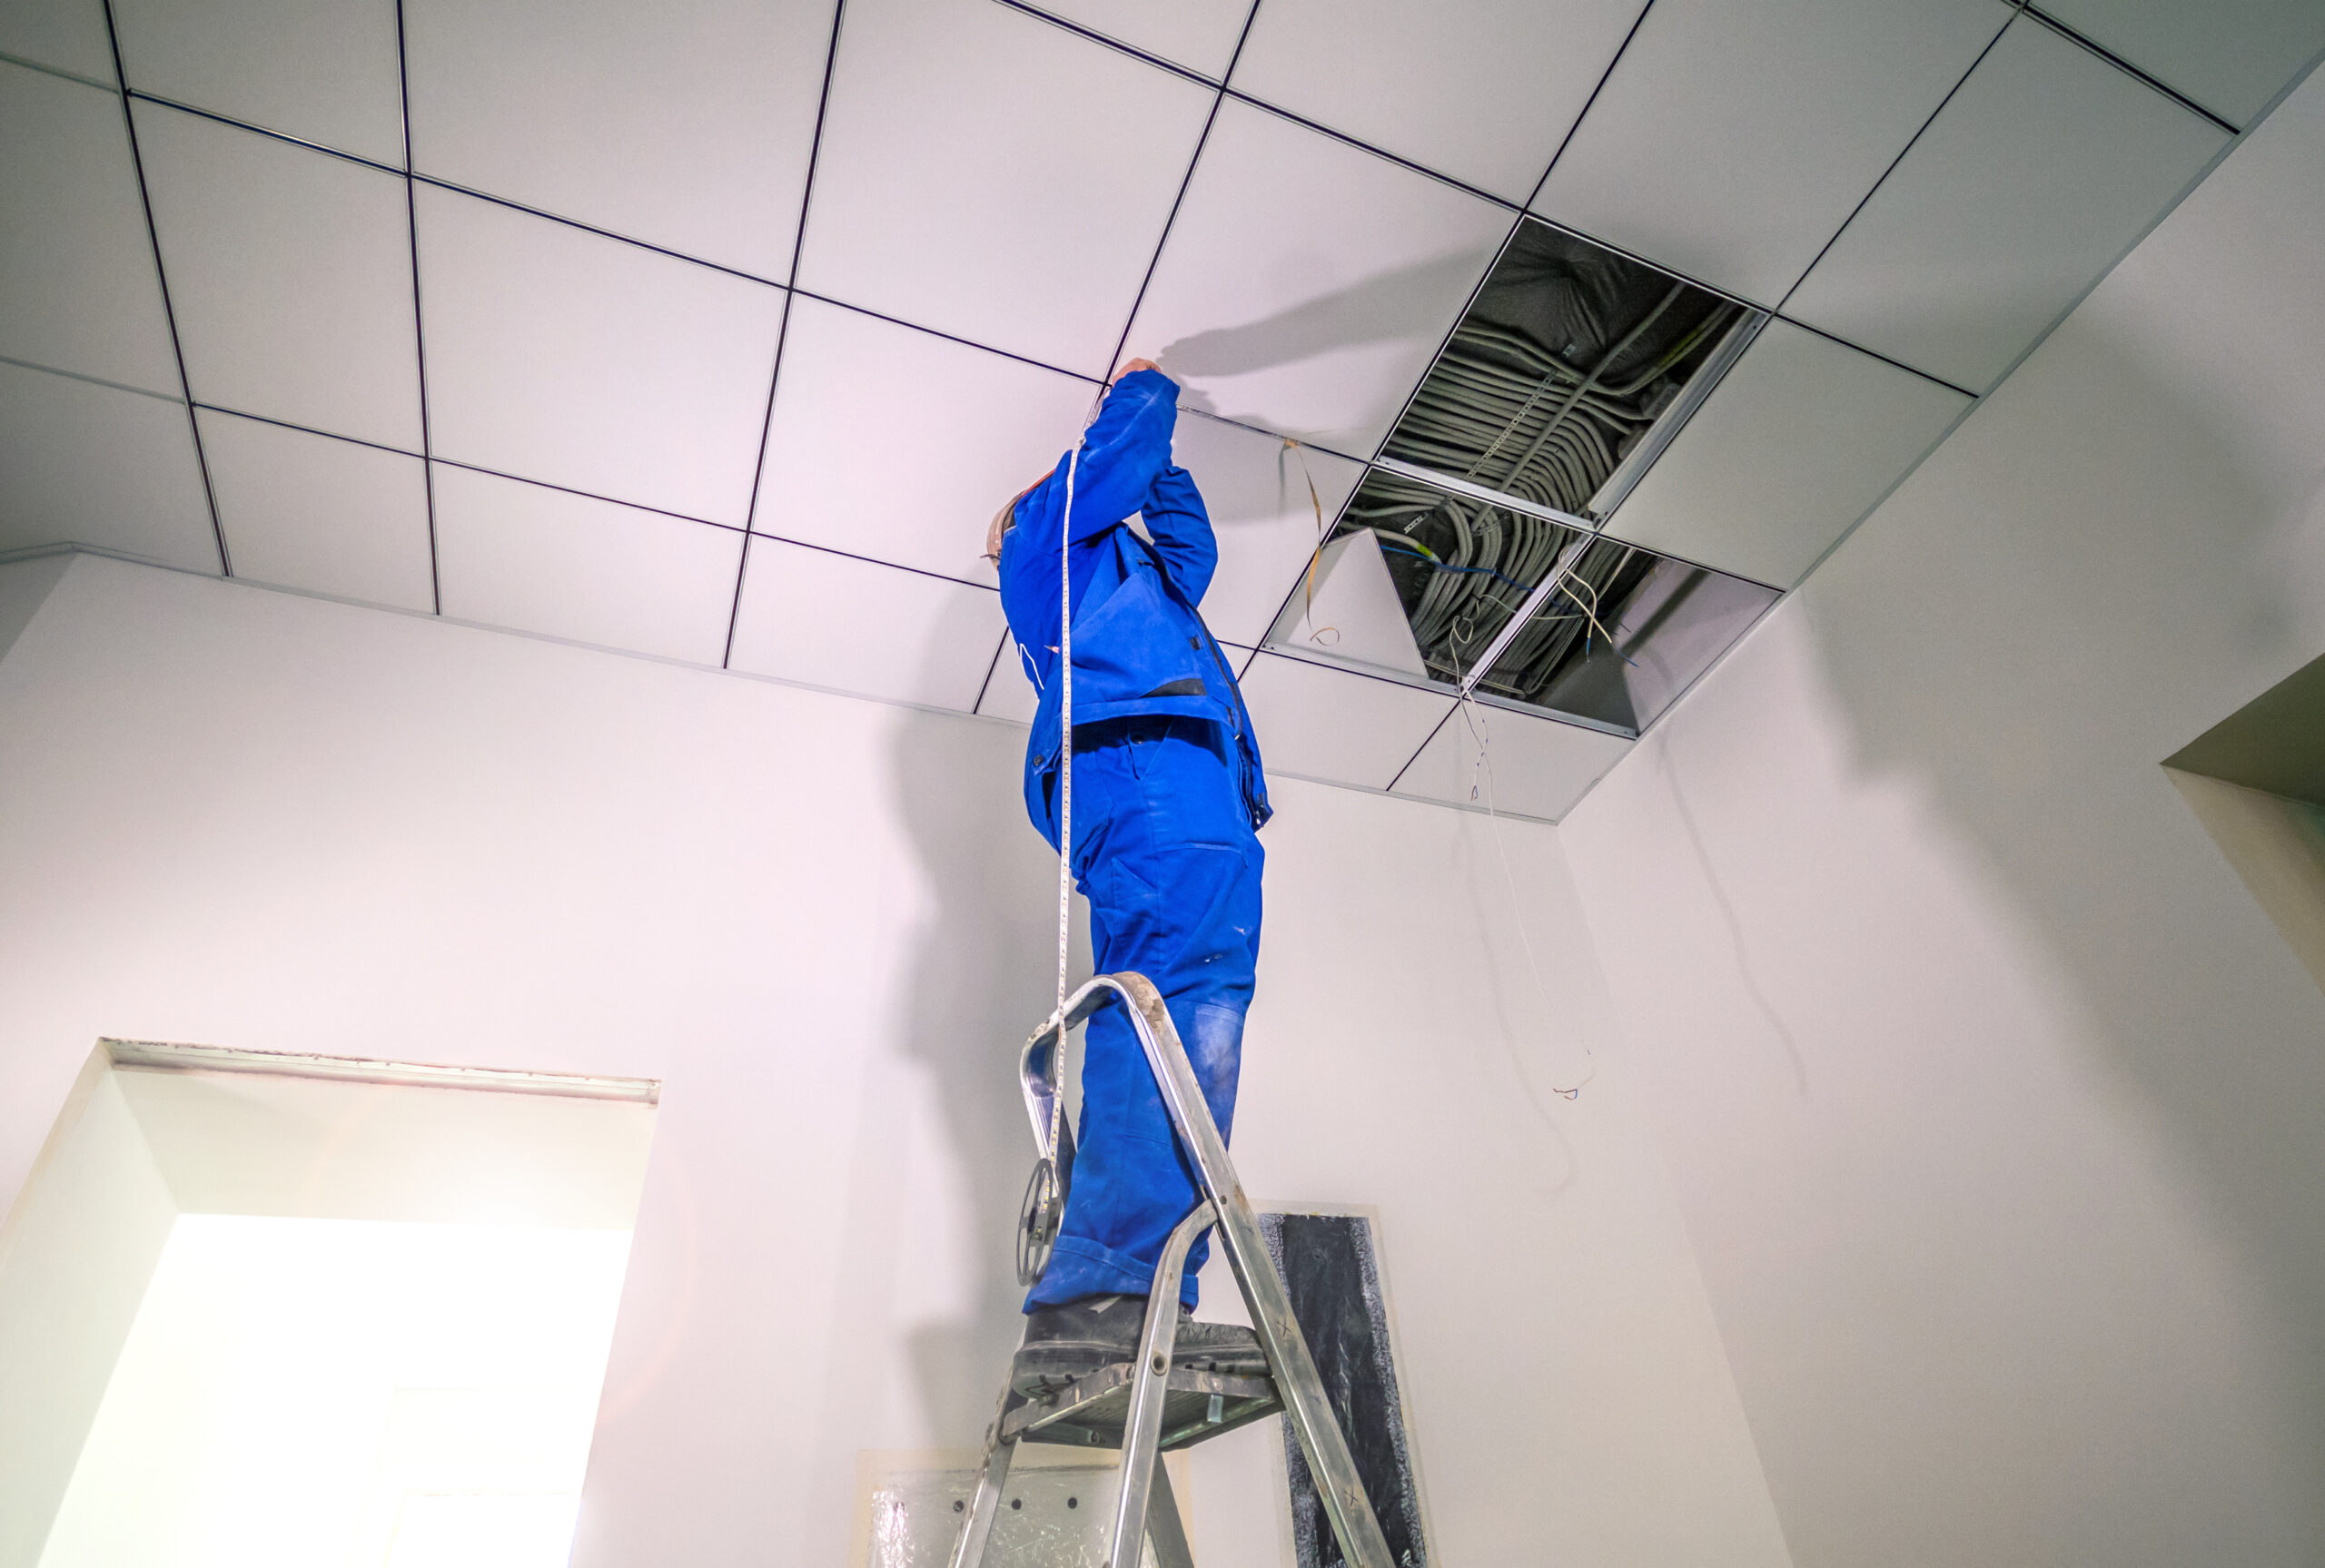 ABS/CBS worker performing commercial building maintenance